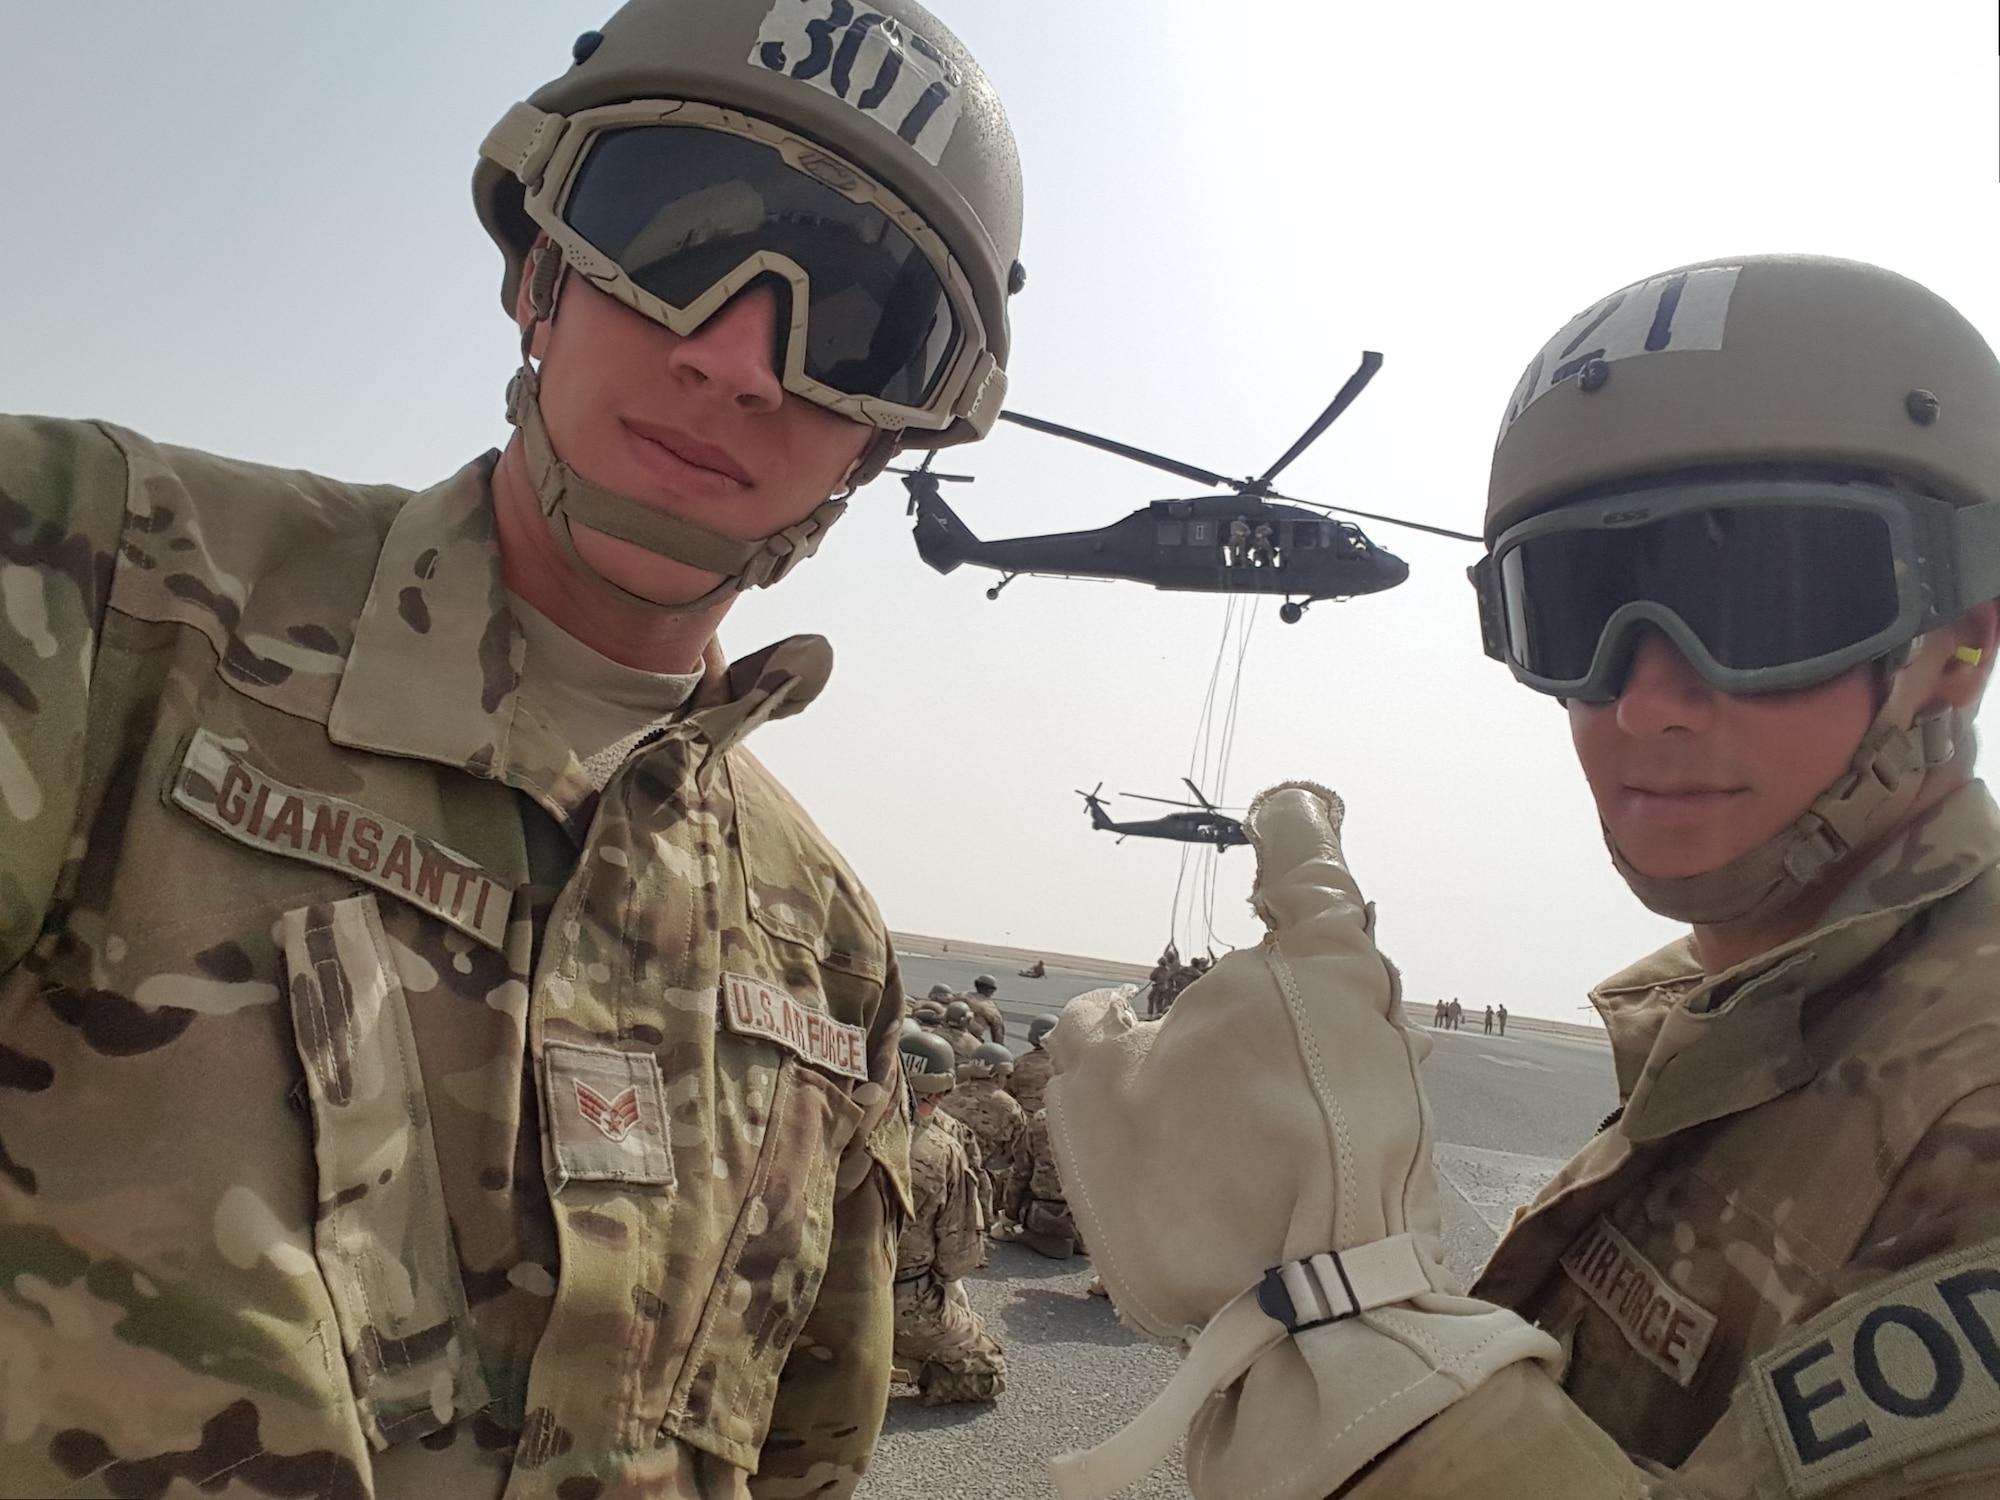 Senior Airman Daniel Giansanti, left, and Senior Airman Domenic Martino, both 386th Air Expeditionary Wing civil engineering squadron explosive ordnance disposal unit technicians, pose for a photo at U.S. Army Air Assault School at Camp Buehring, Kuwait on April 13, 2017. The graduation of the two Airmen from the 386th also serves as an unprecedented event, as this is the first time in history that Airmen have graduated from this particular course. (Courtesy photo)